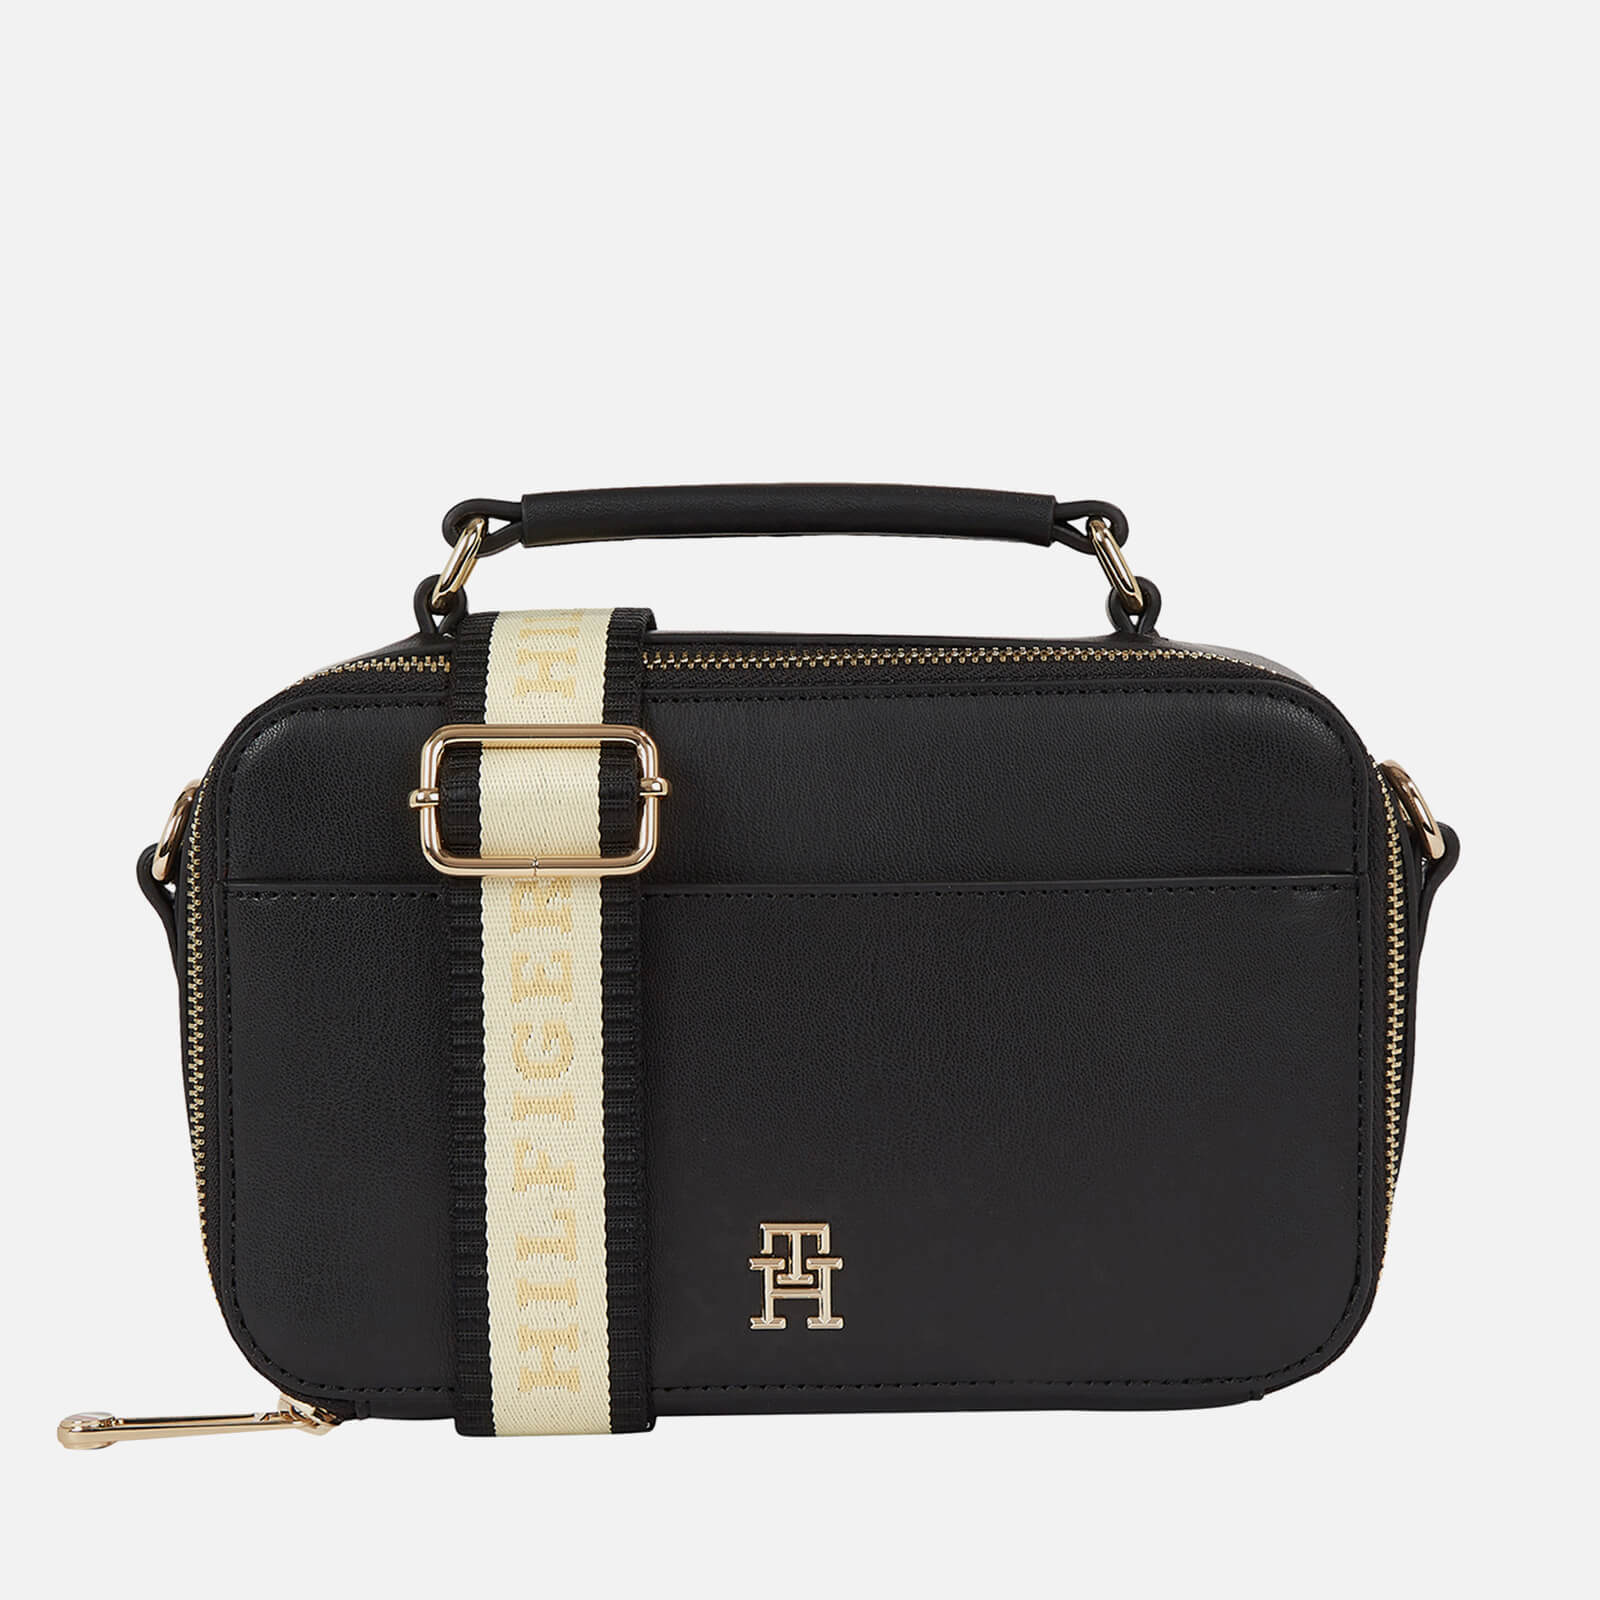 Tommy Hilfiger Women's Iconic Tommy Camera Bag - Black product